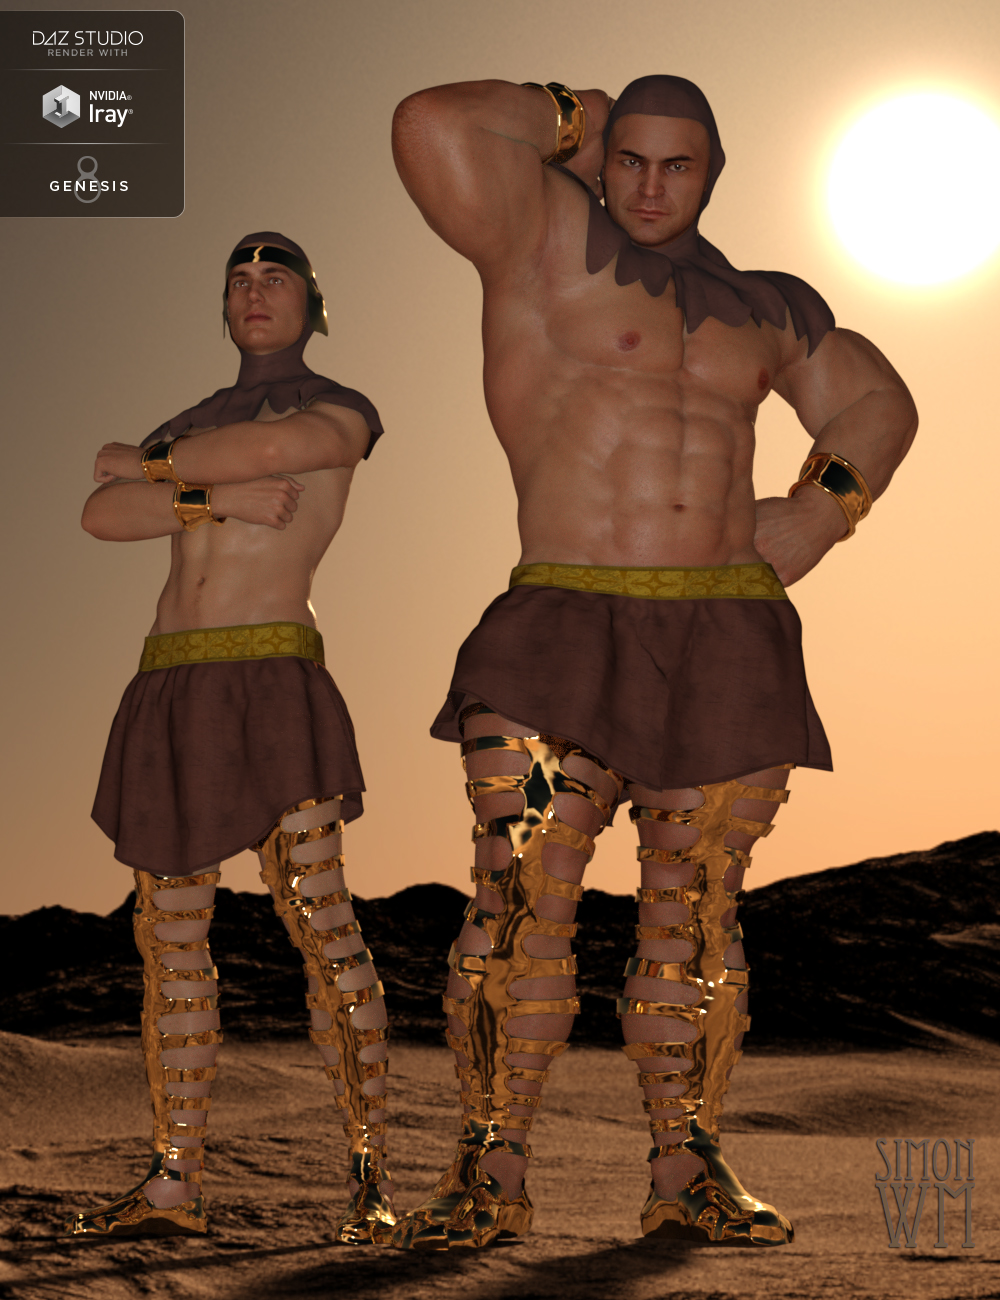 Chronicles of the Gods Outfit for Genesis 8 Male(s) by: SimonWM, 3D Models by Daz 3D